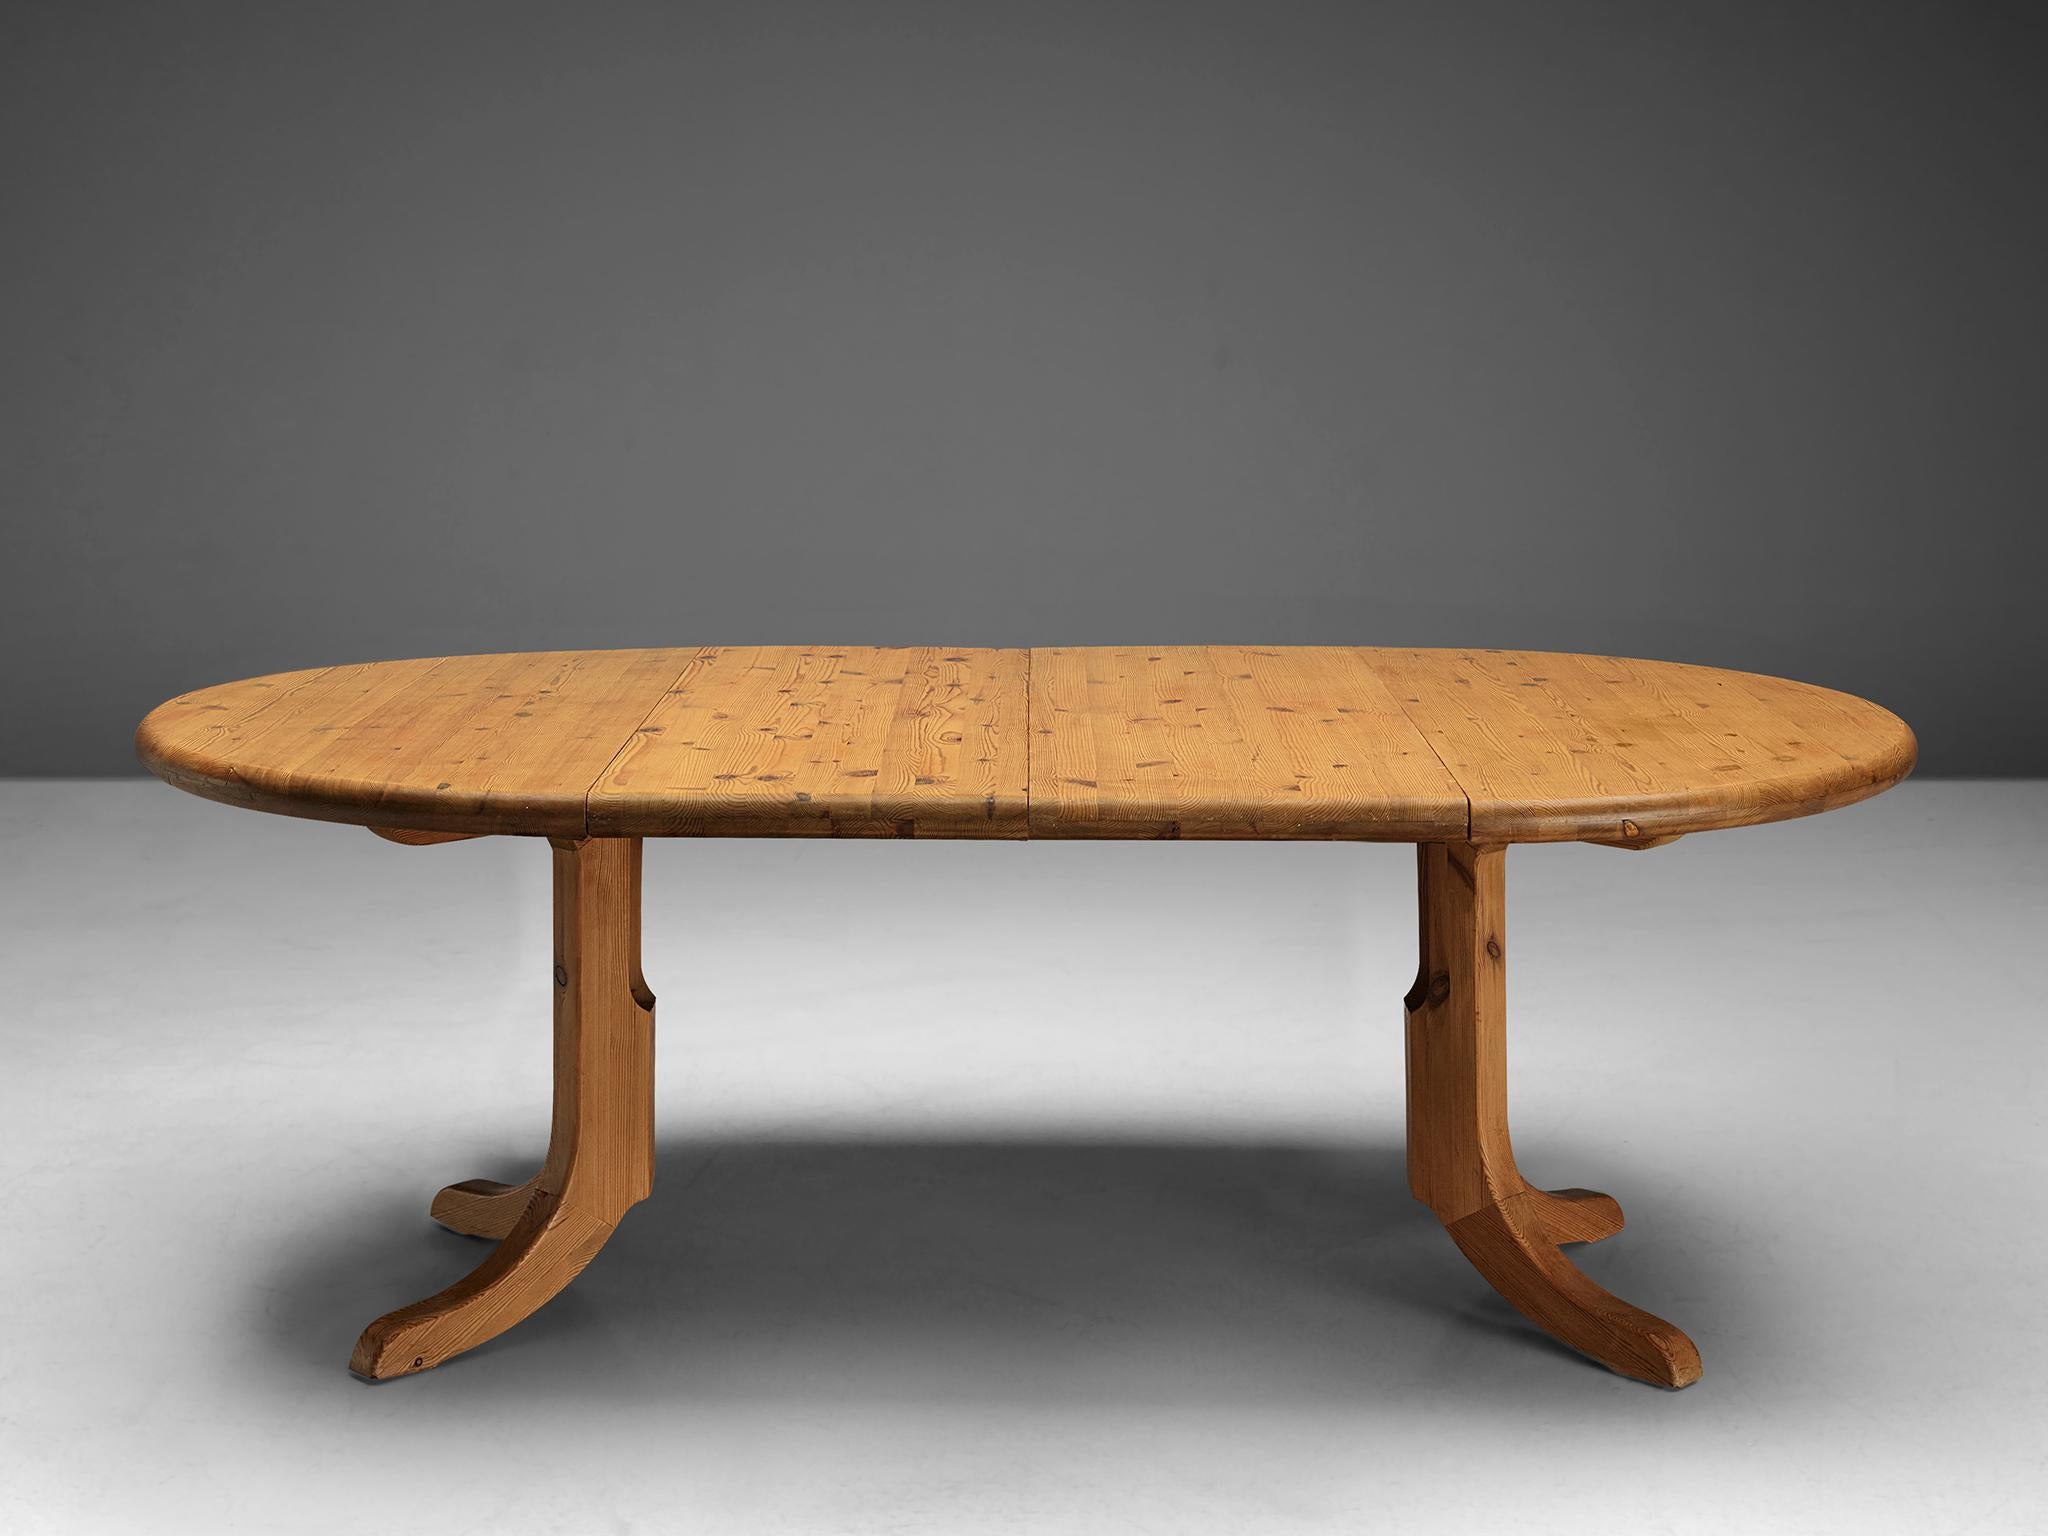 Rainer Daumiller, extendable dining table, pine, Denmark, 1970s.

Robust and simplistic dining or conference table in solid pine, designed by Rainer Daumiller. A modest design with an oval shaped tabletop and horizontally placed woodgrain. The